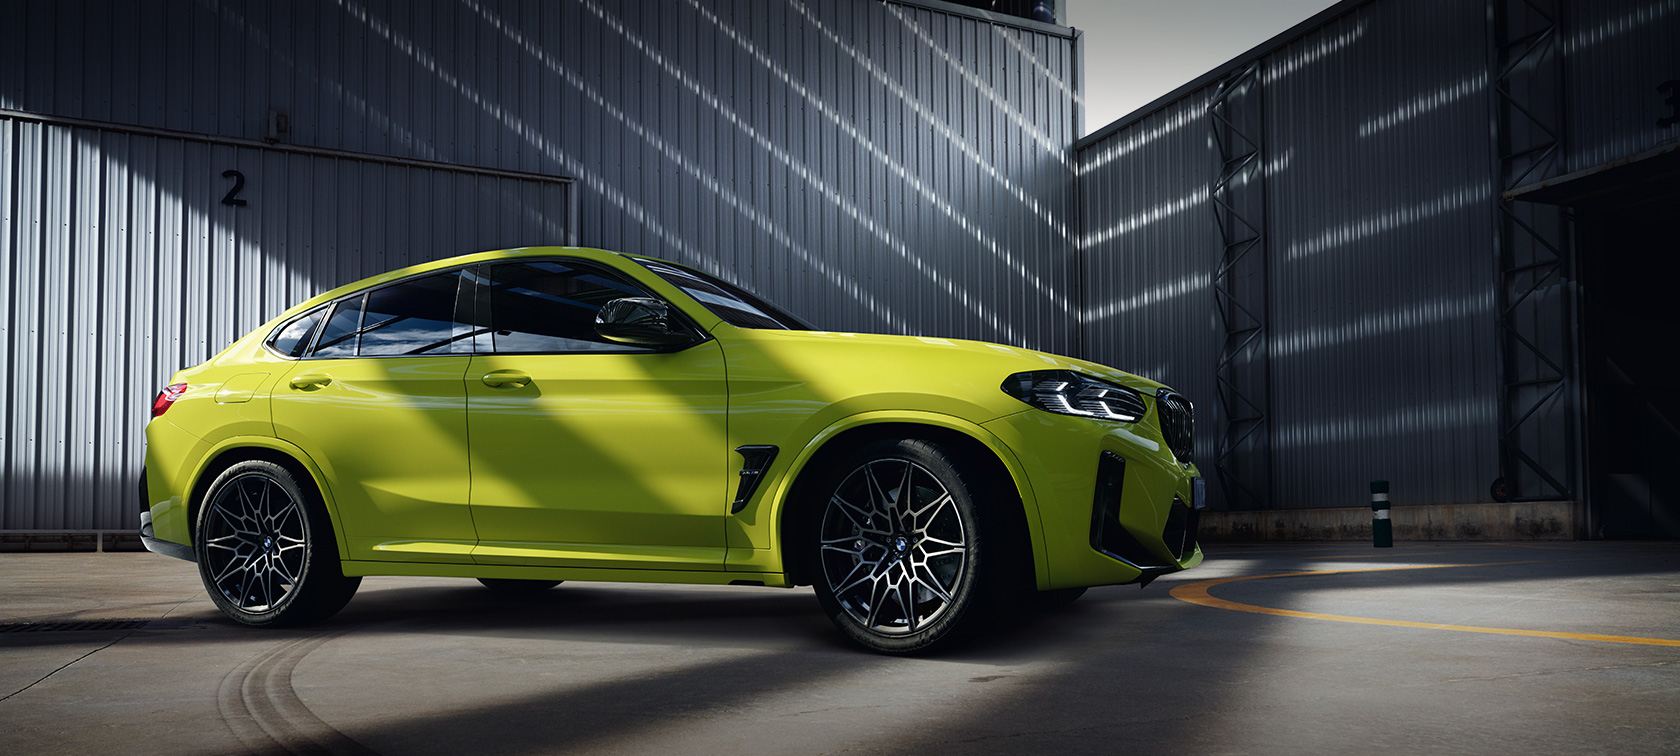 BMW X4 M Competition F98 LCI Facelift 2021 Sao Paulo Yellow side view in the hall